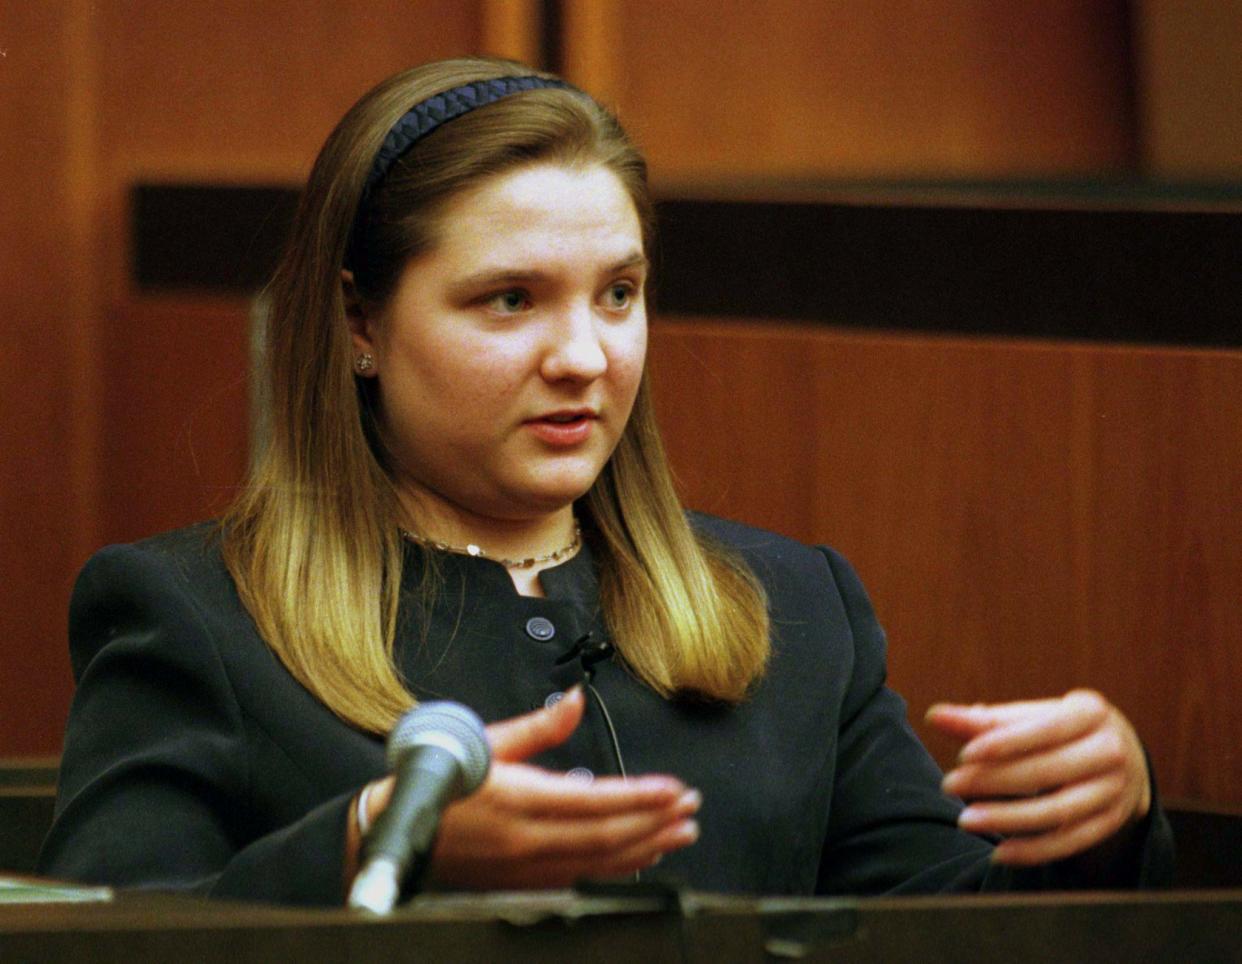 British nanny Louise Woodward demonstrates how she held Matthew Eappen the day he had to be rushed to the hospital as she testifies on her own behalf in her murder trial in a Cambridge, Massachusetts courtroom, October 23.  Woodward is accused of shaking nine month-old Matthew Eappen to death while he was in her care in February 1997.